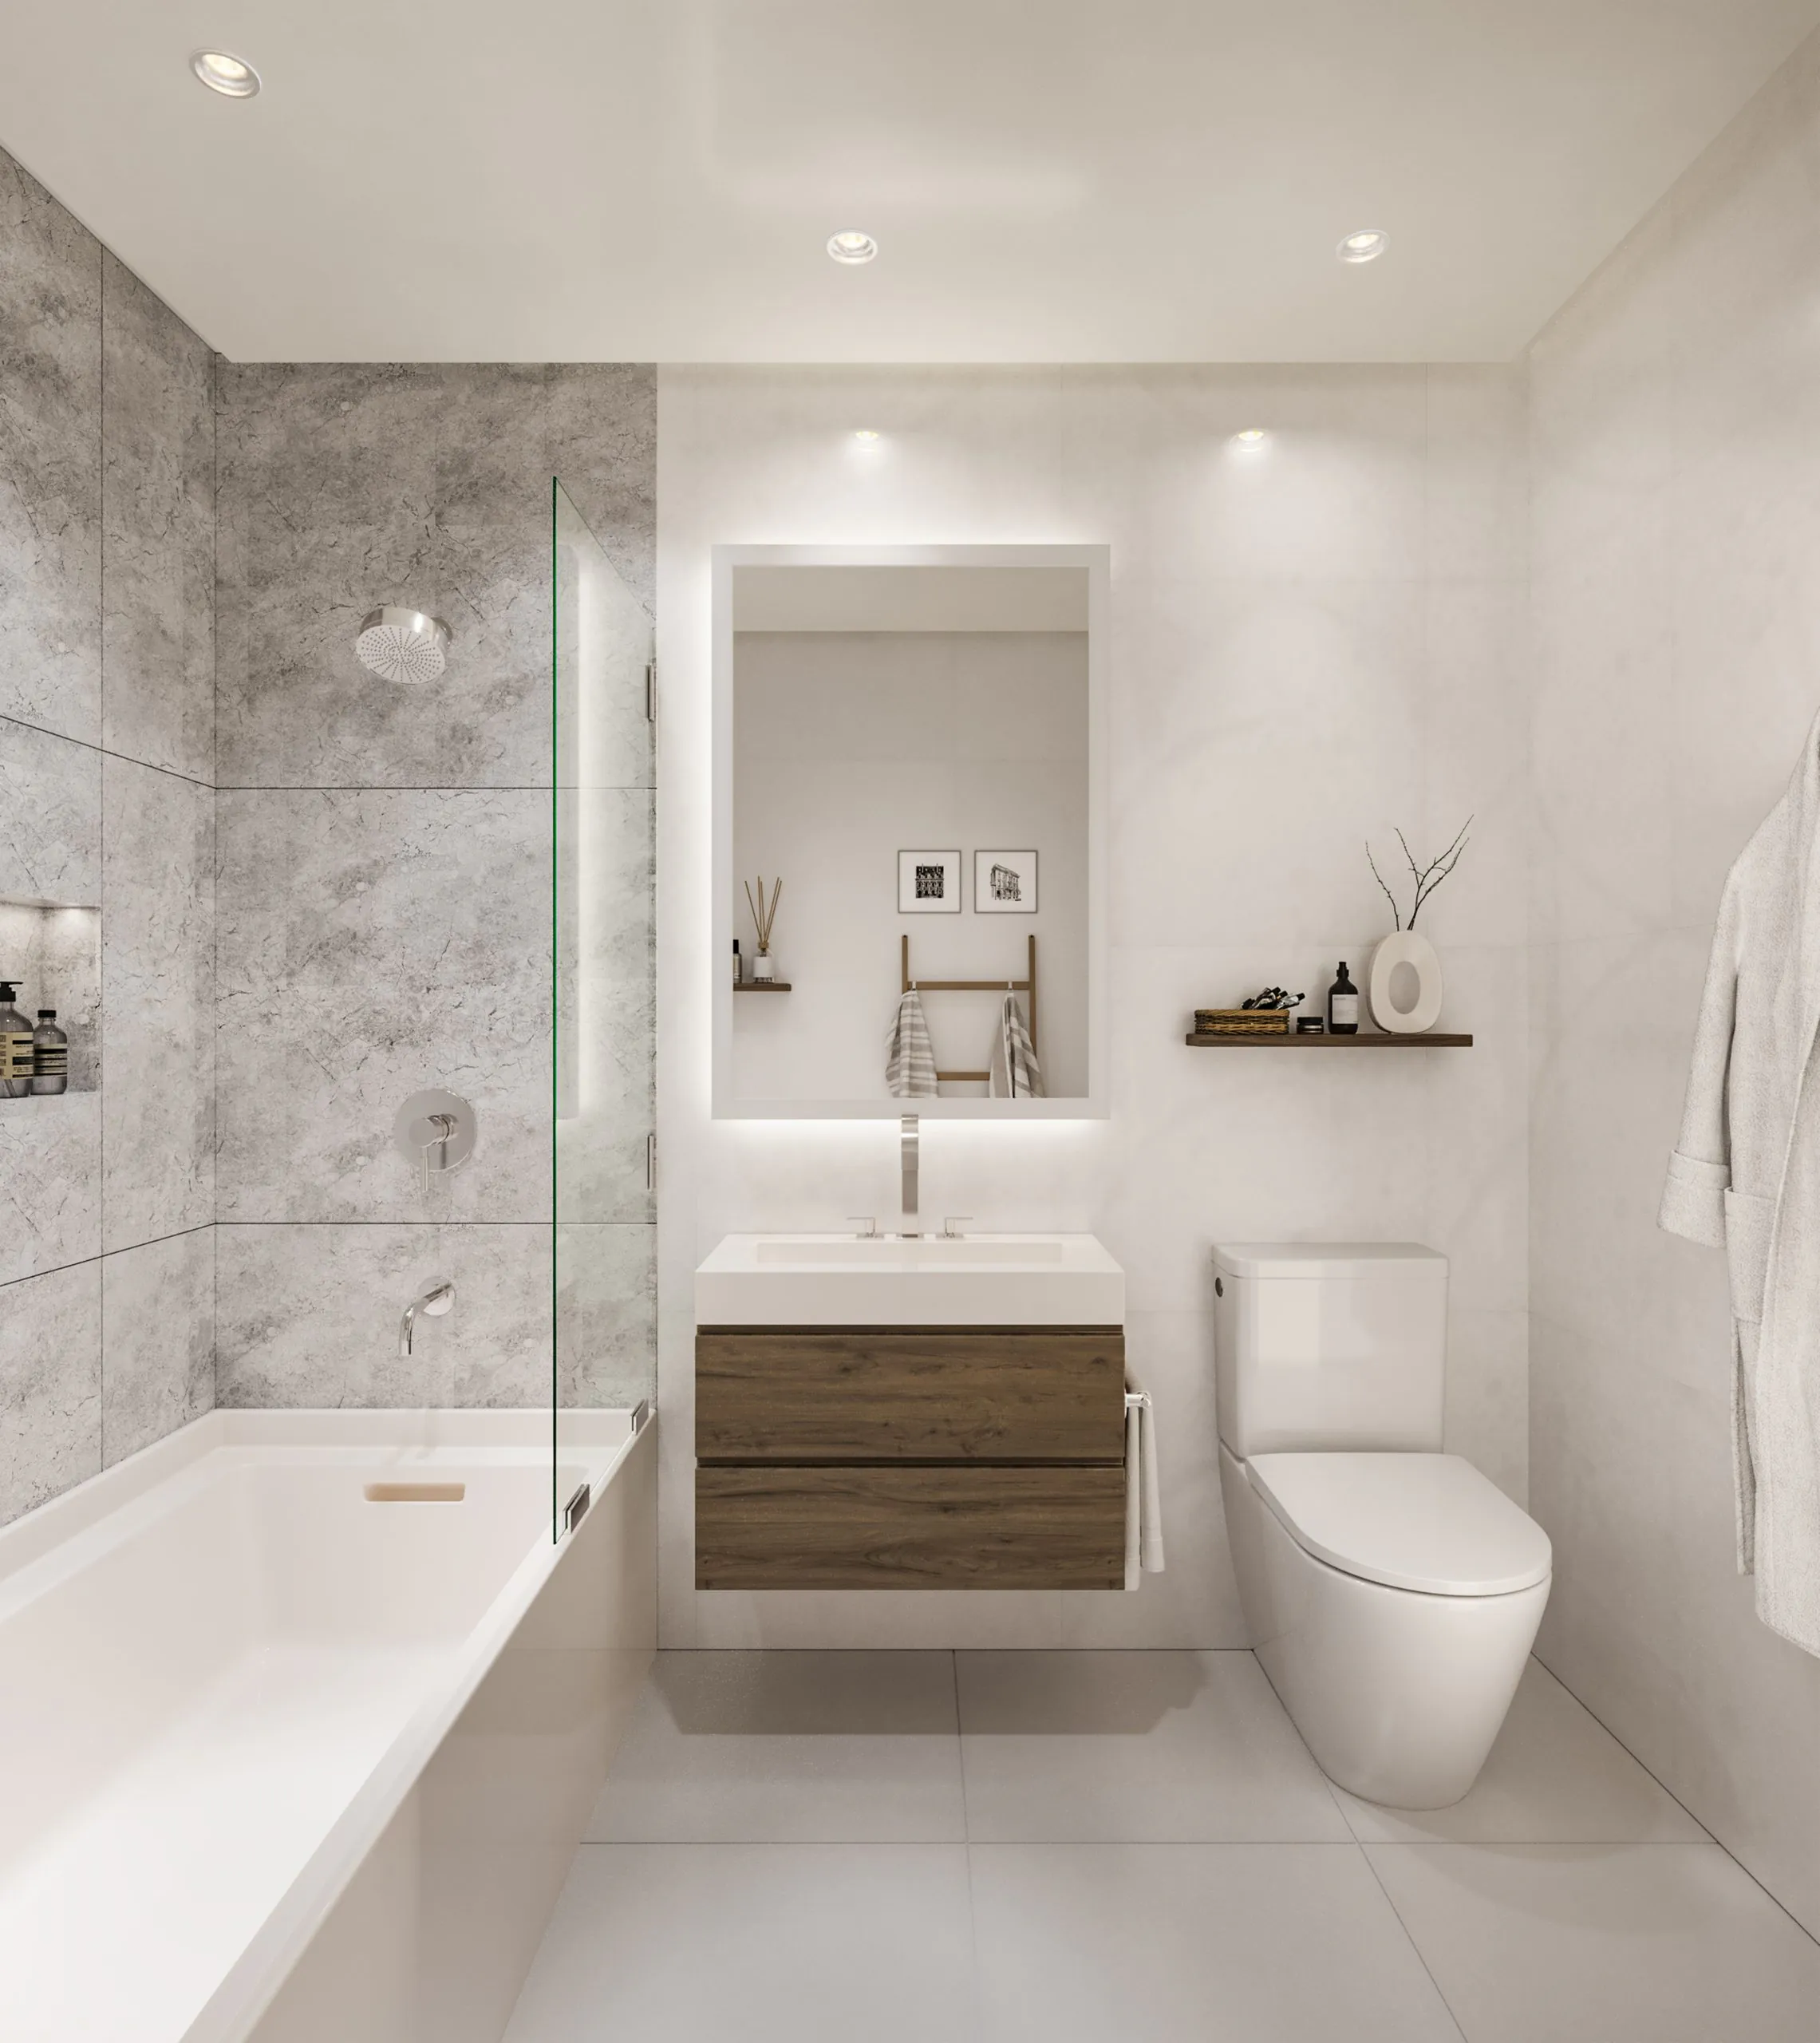 Generously proportioned and outfitted with clean, minimalistic finishes create a harmonious atmosphere in the spa-like bathrooms at Amnia